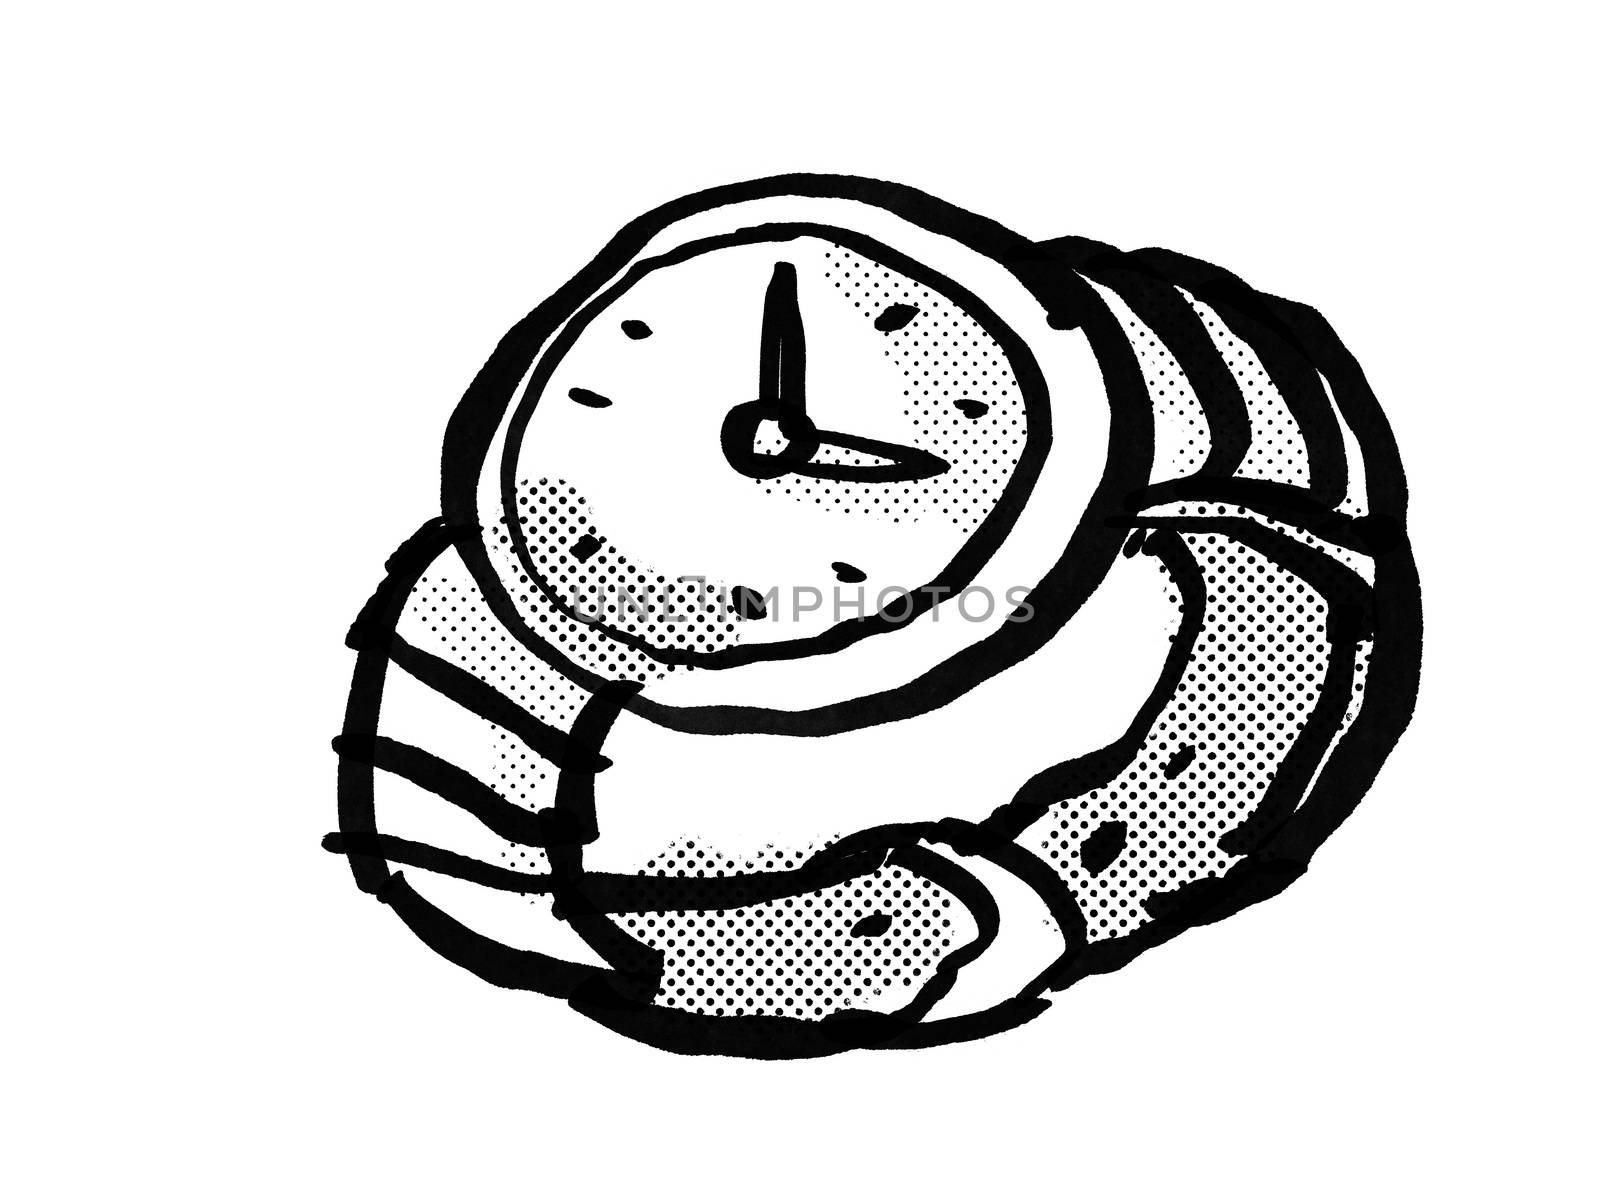 Retro cartoon style drawing of a vintage wristwatch or wrist watch on isolated white background done in black and white